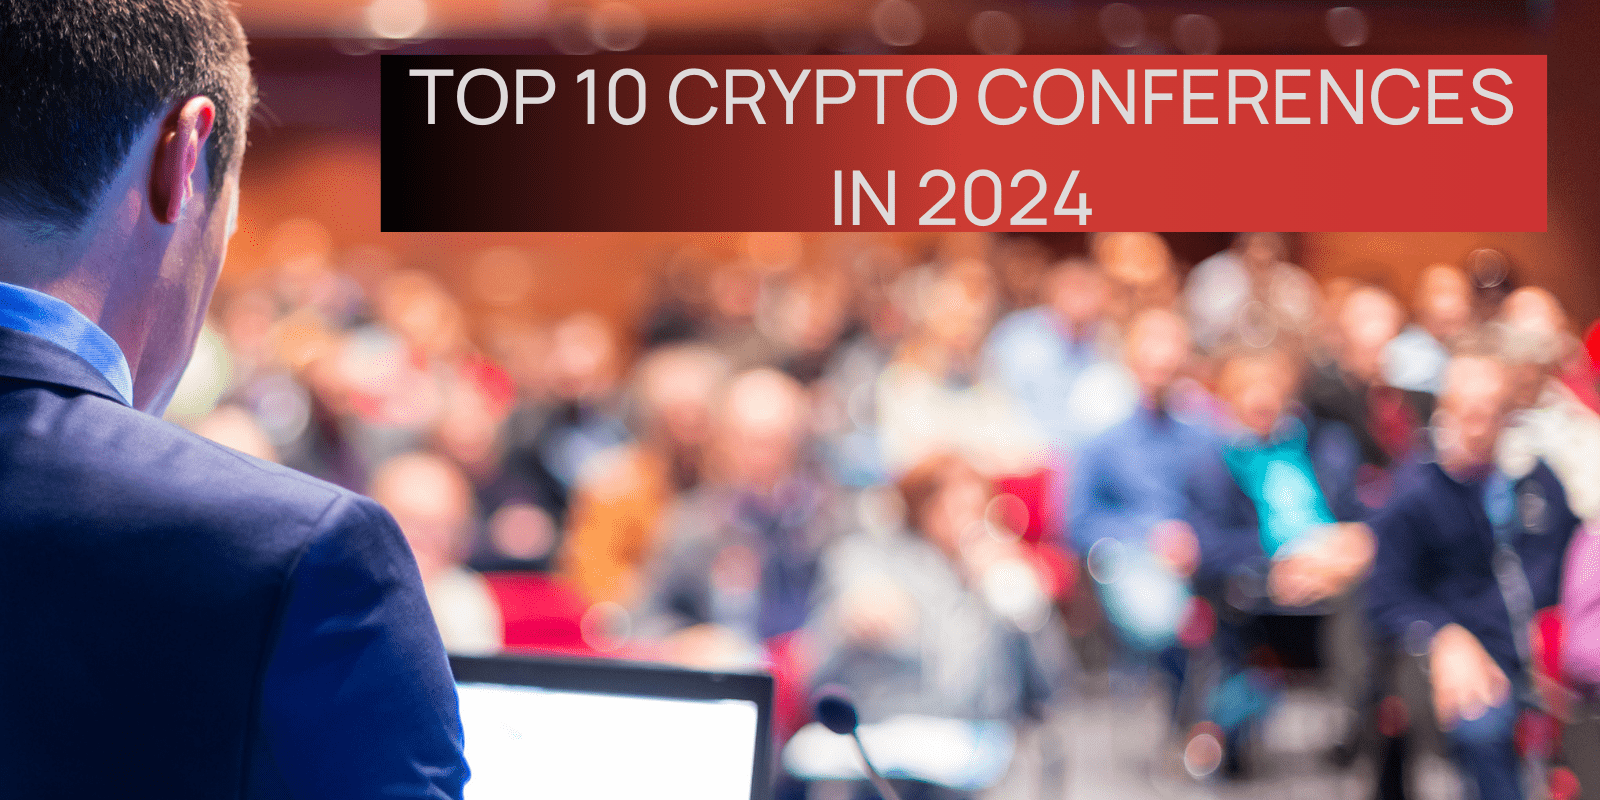 Top 10 crypto conferences for 2024 - MetaWise